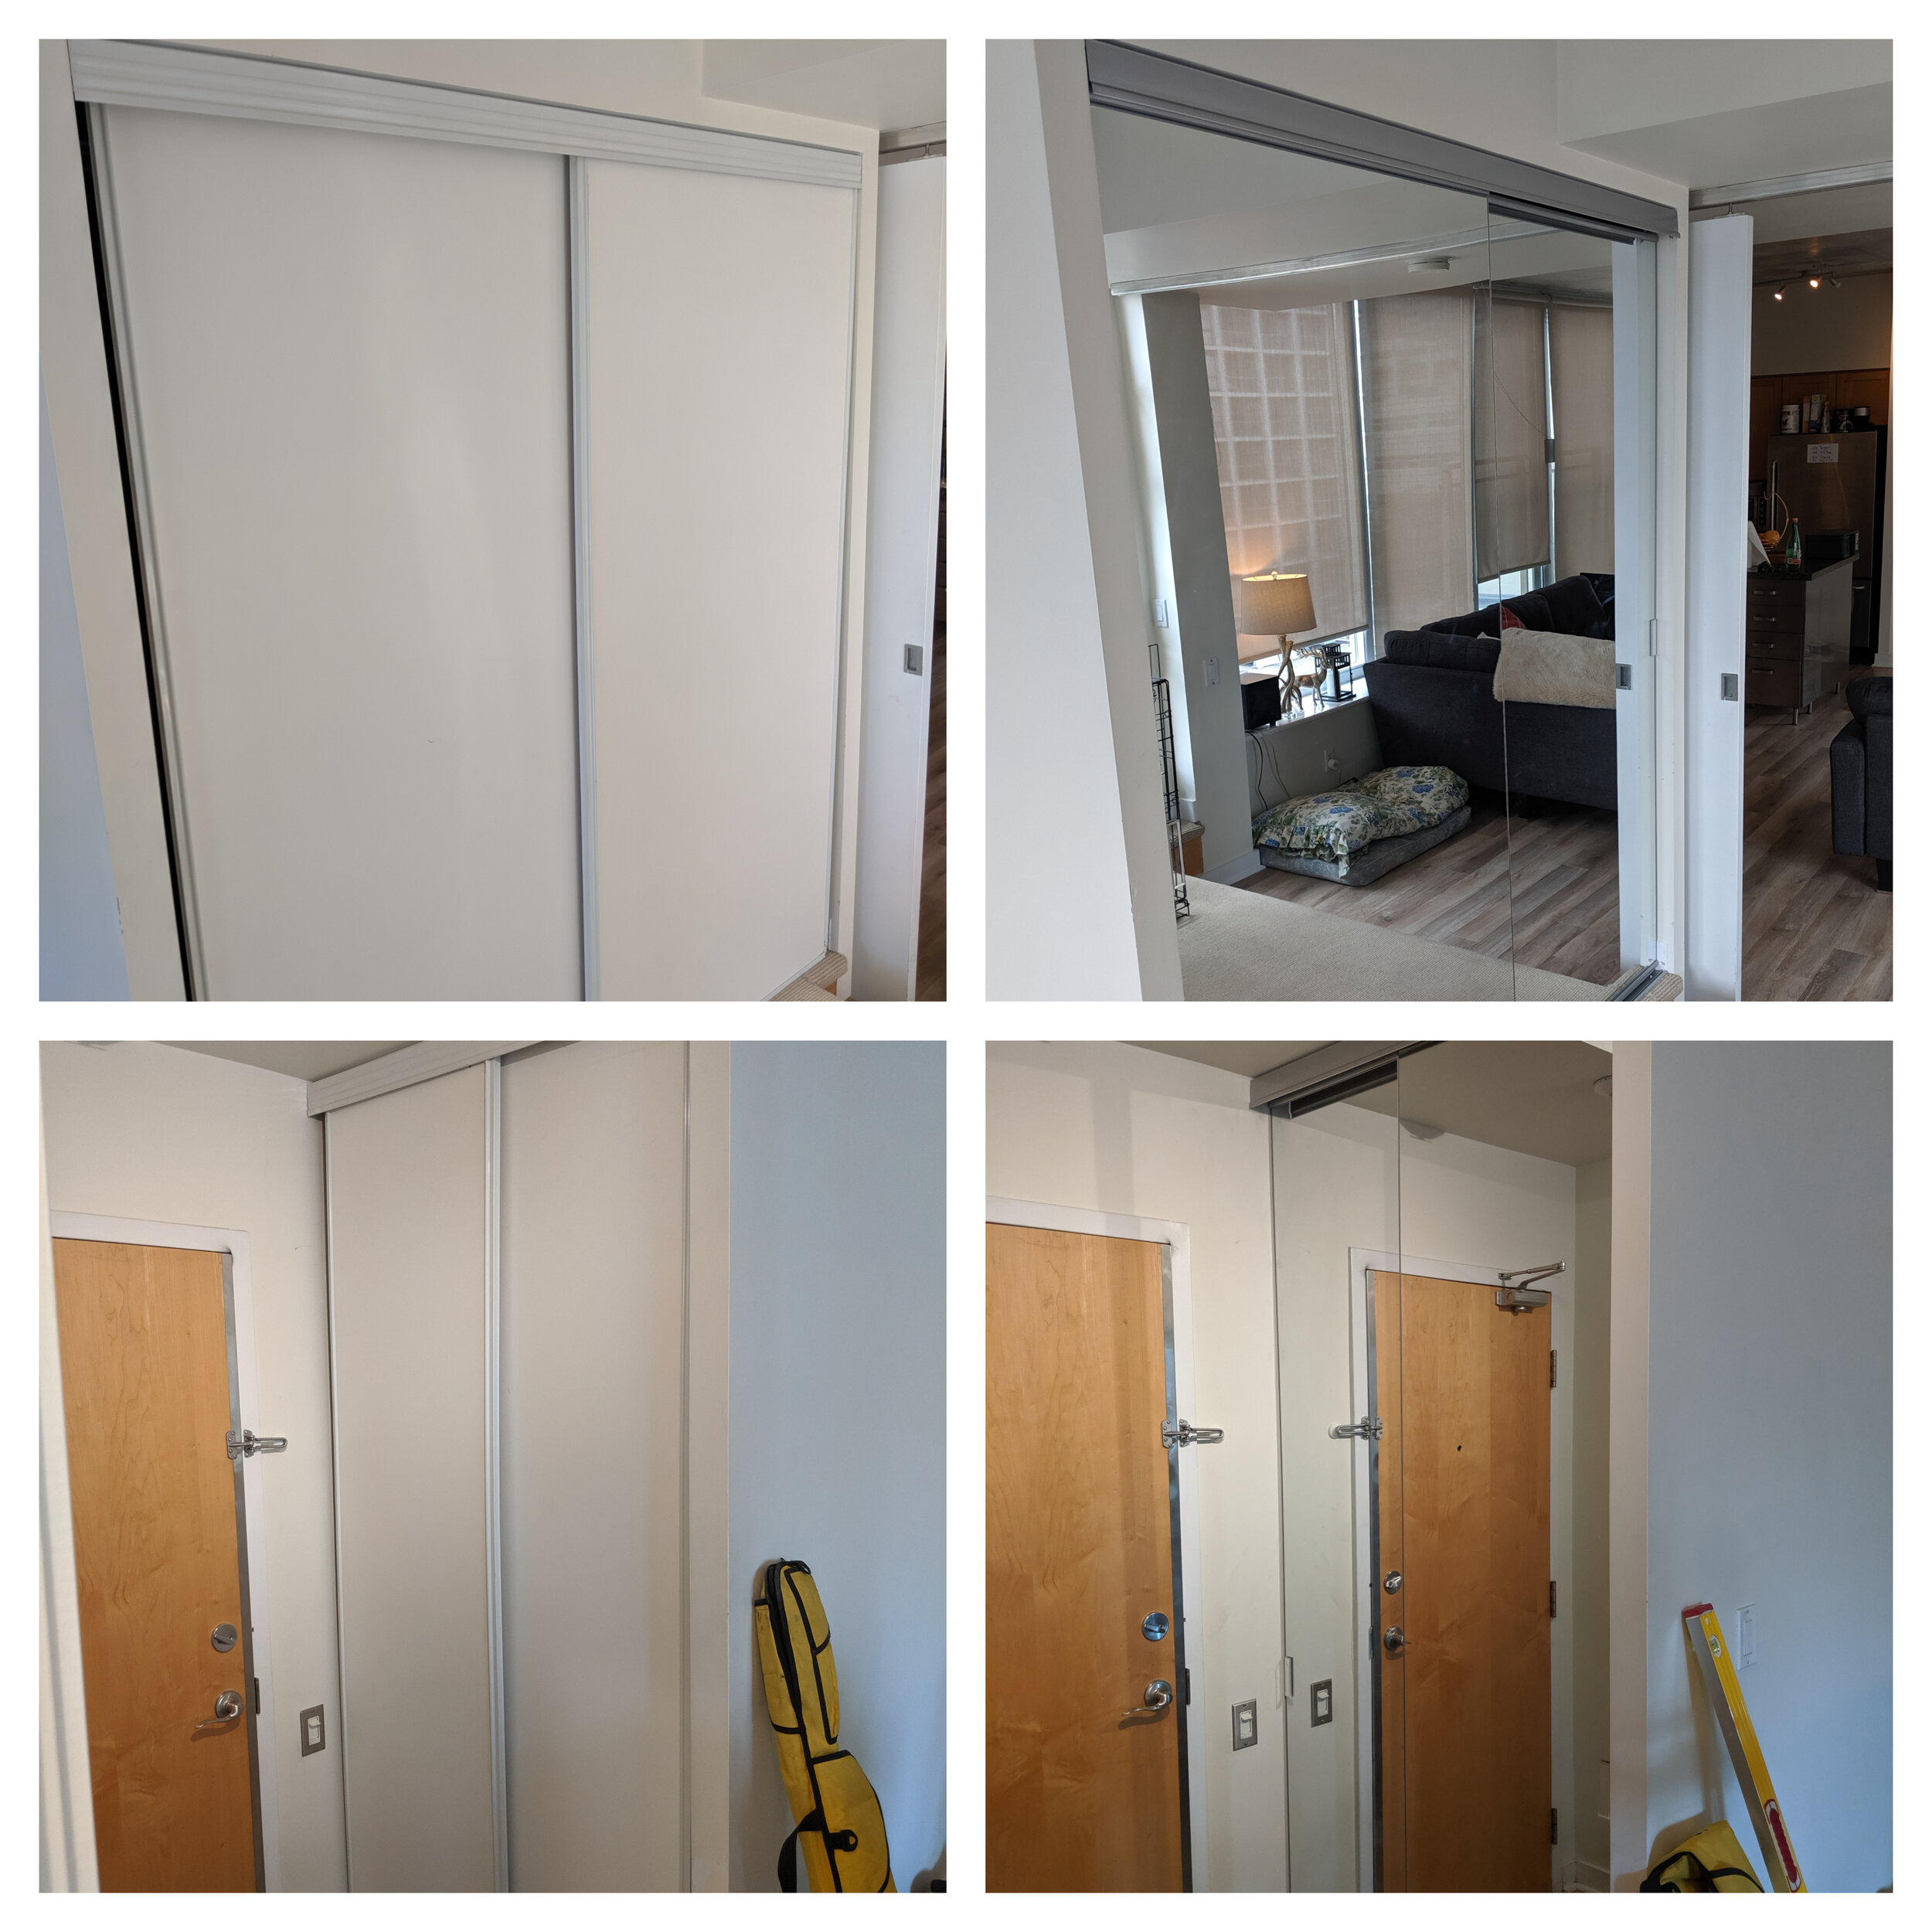 Sliding Closet Doors Installation And, How Much To Install Mirror Sliding Closet Doors